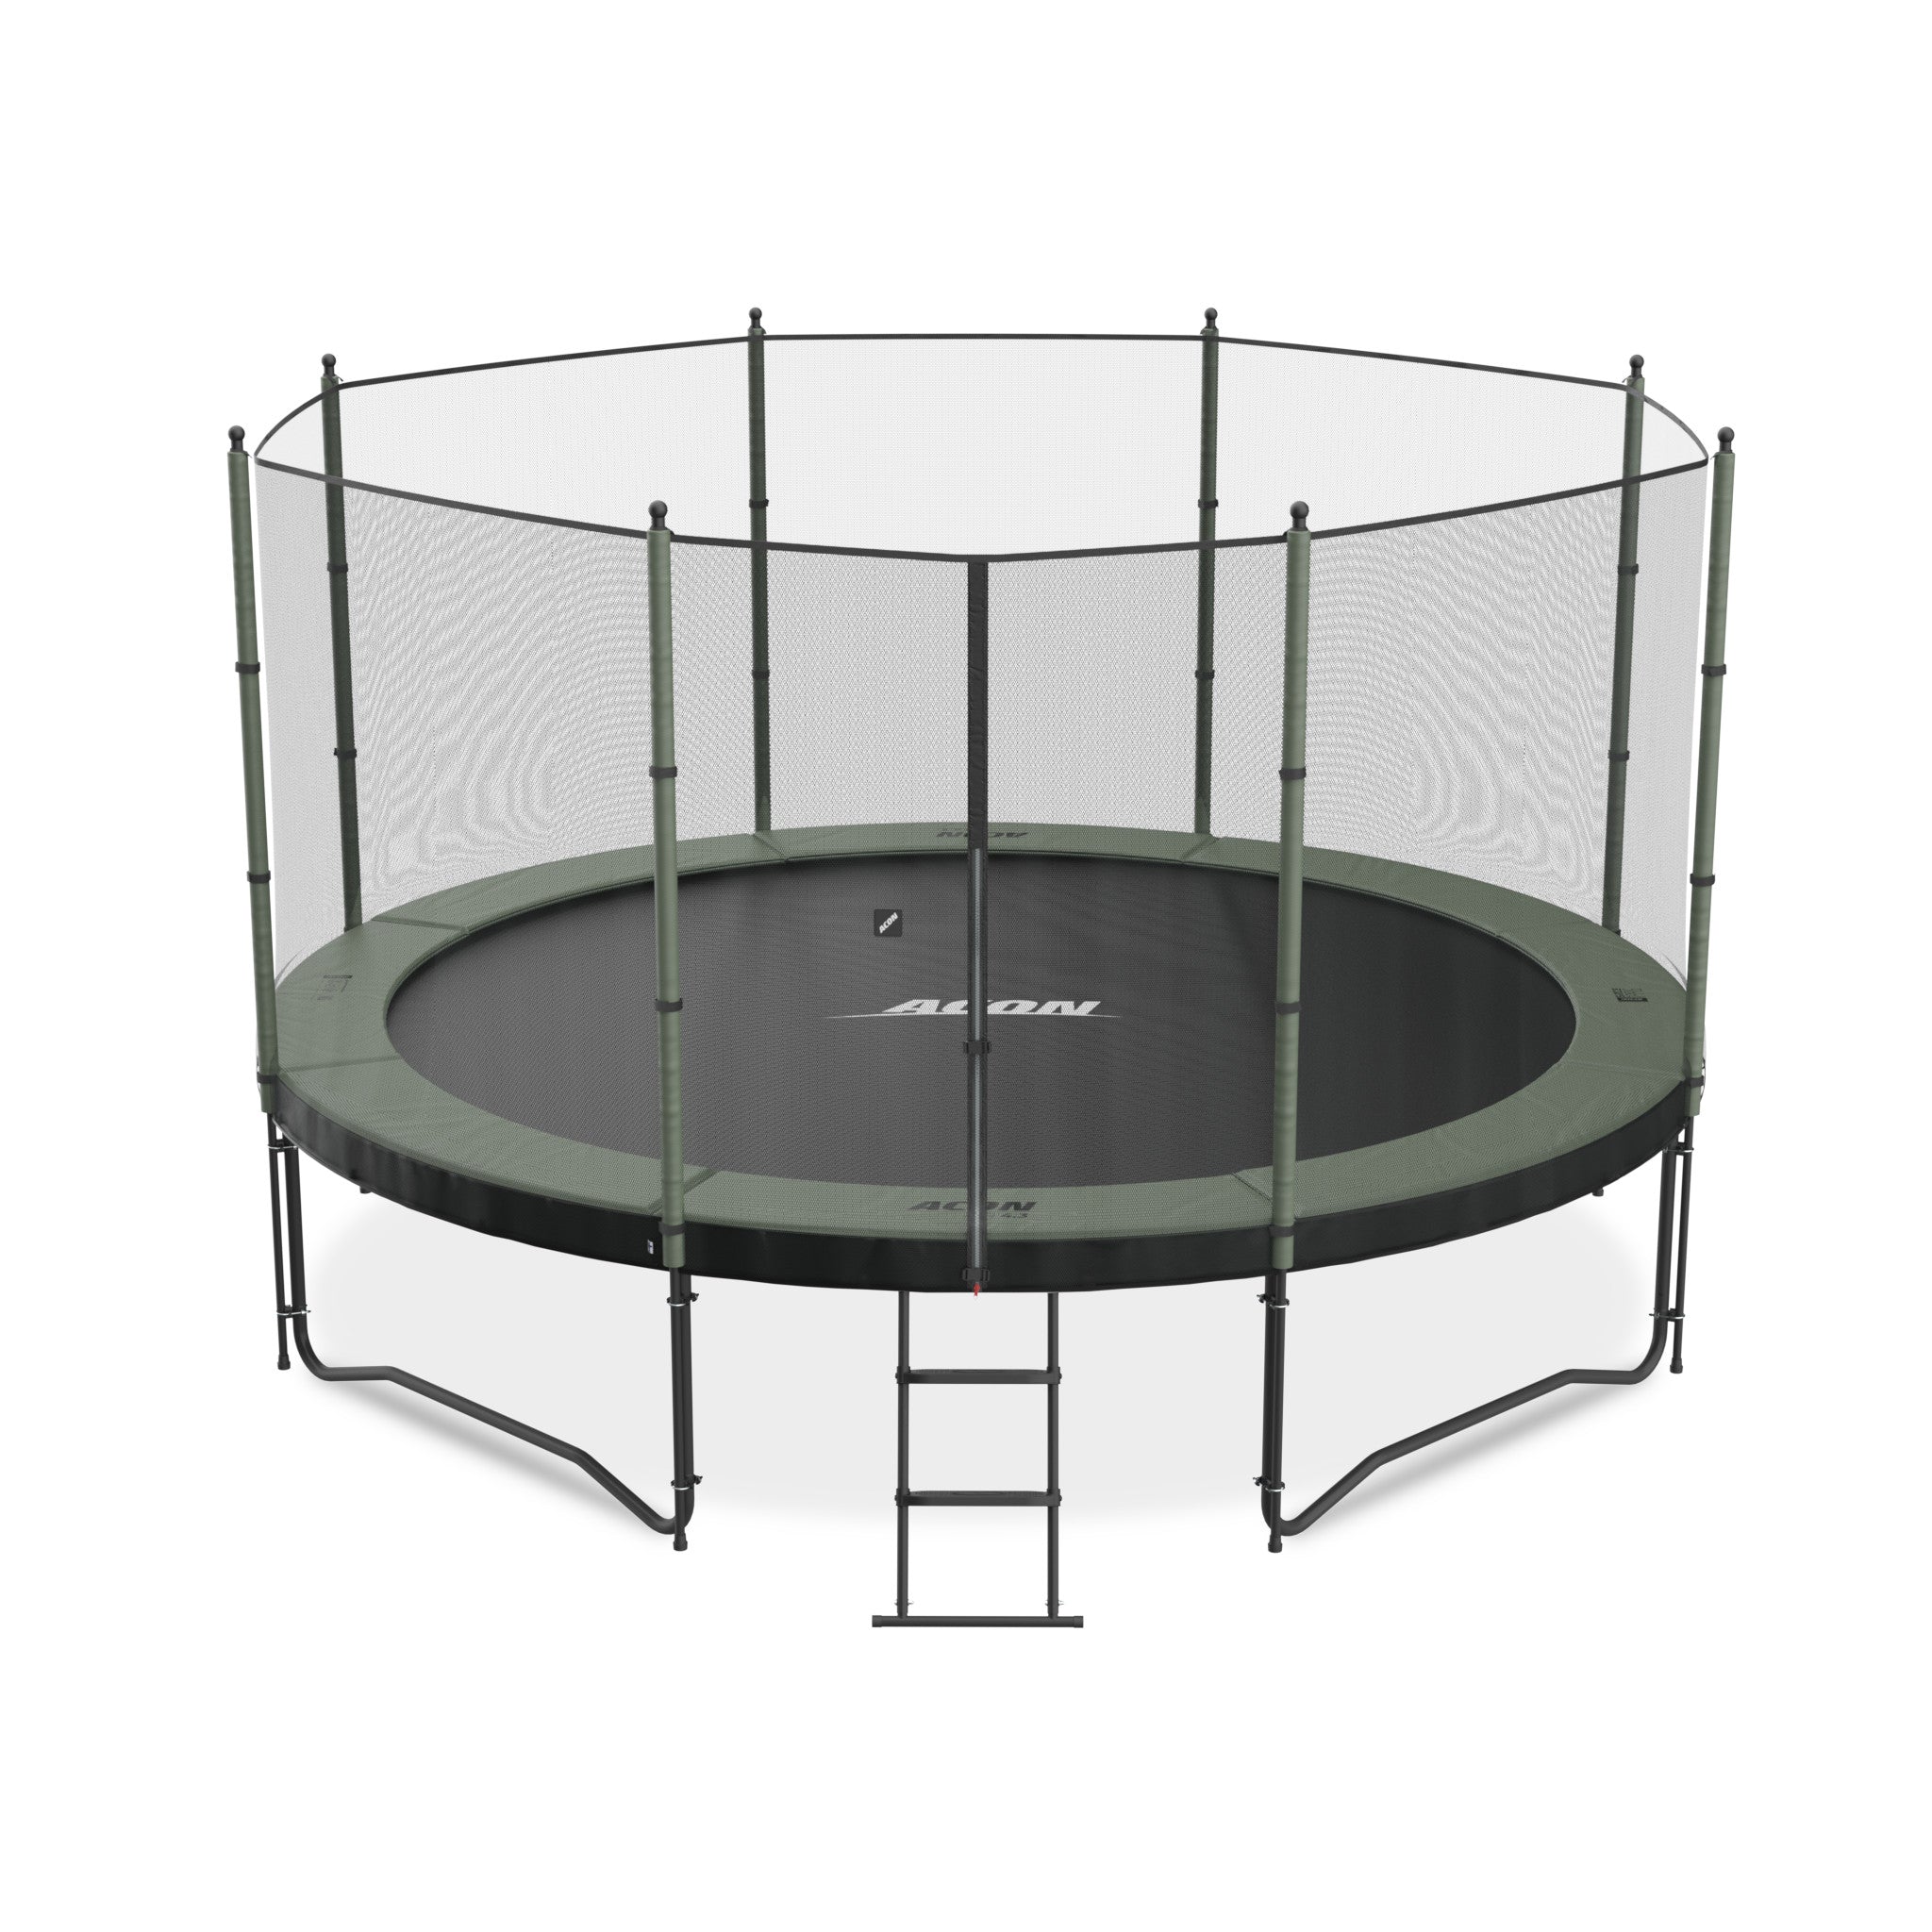 ACON Air 4,3m Trampoline with Standard Enclosure and ladder.